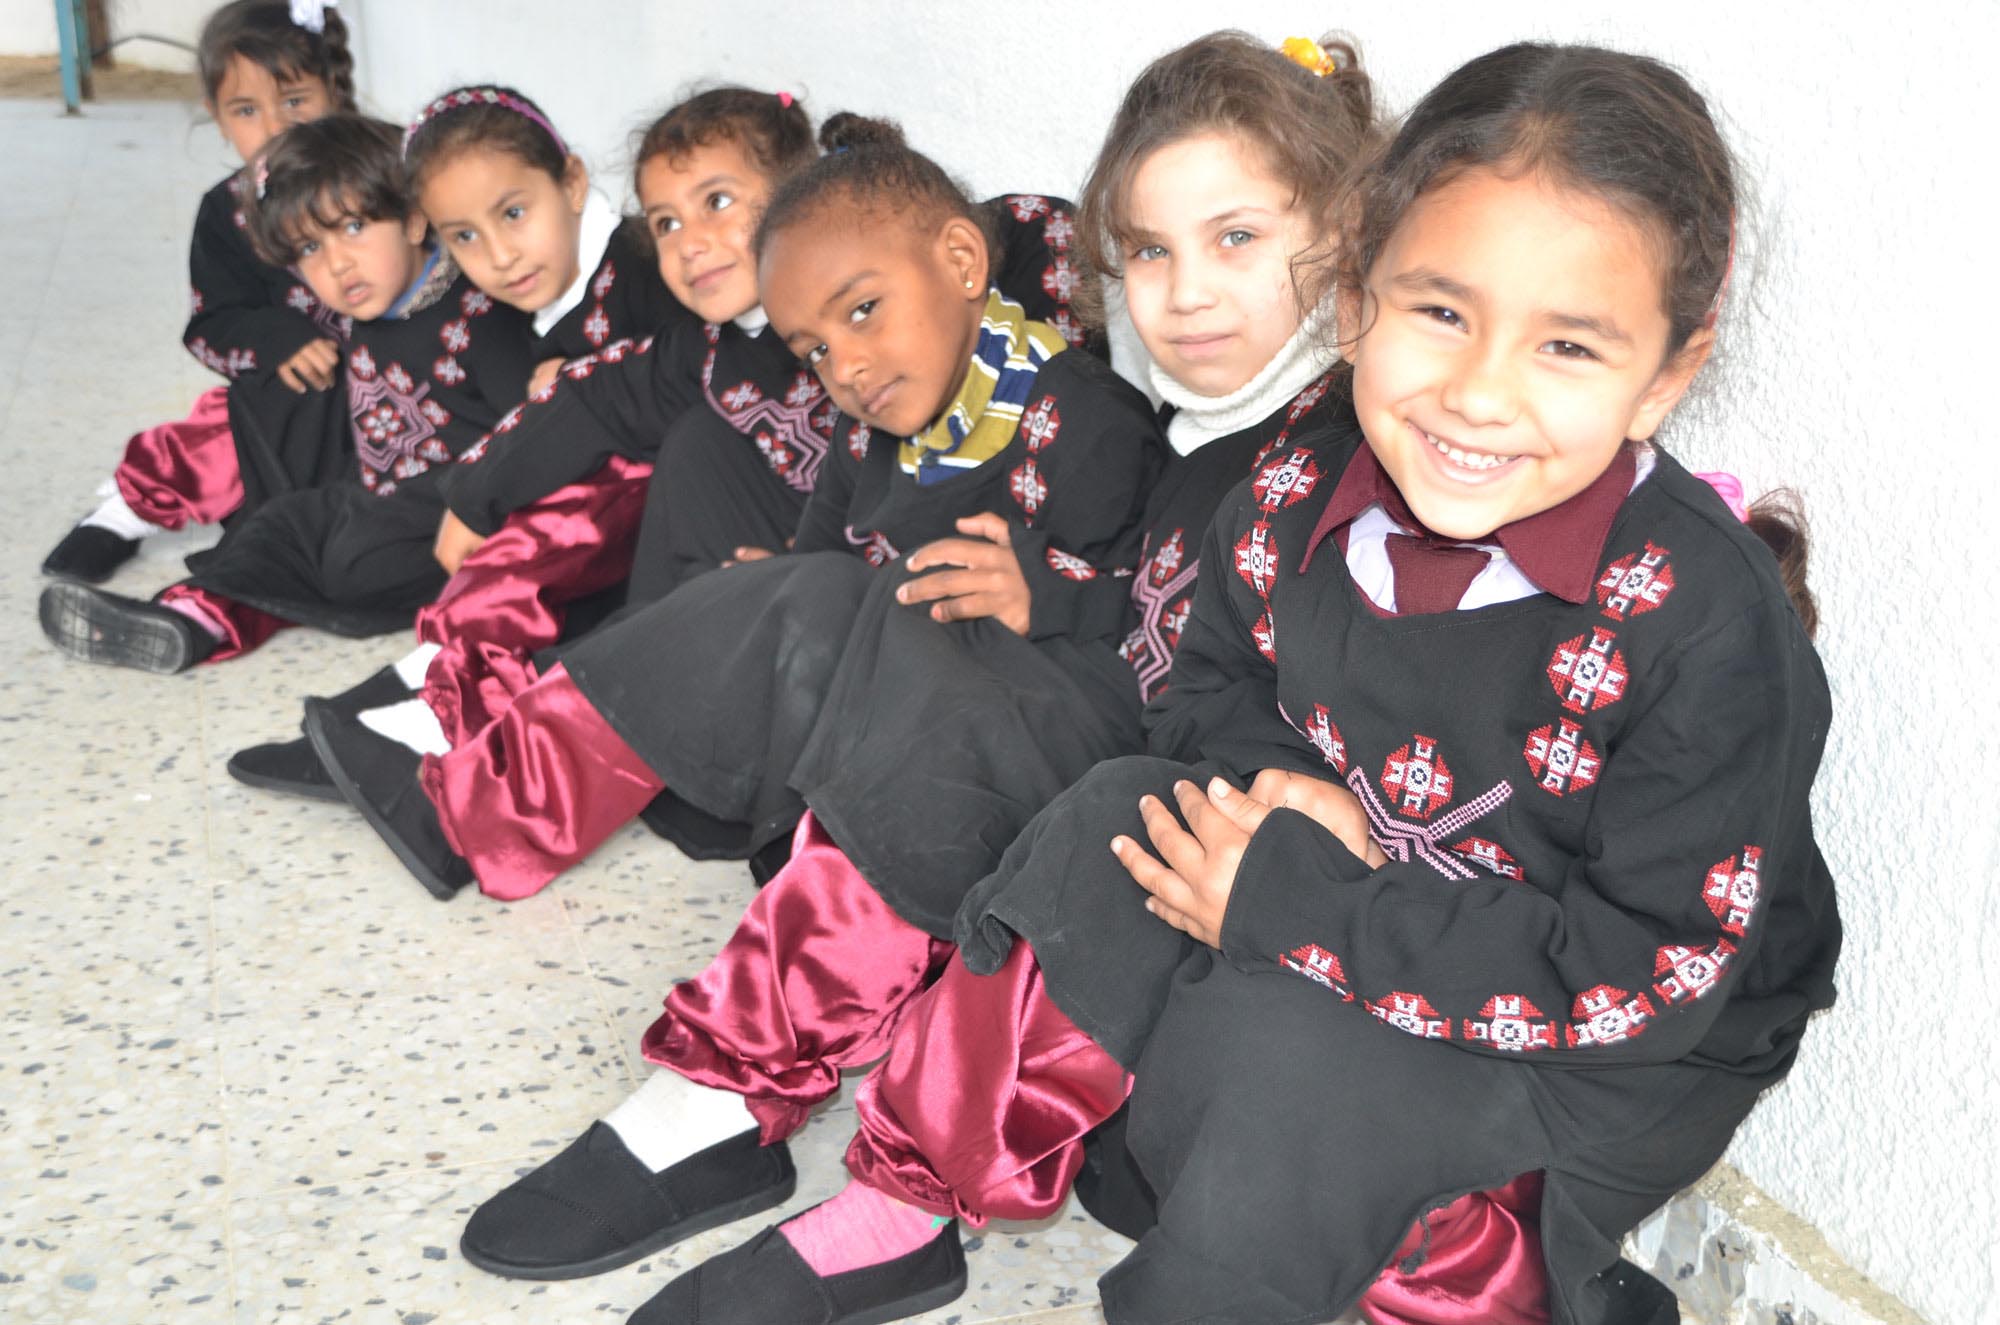 Gaza preschoolers celebrated the delivery of TOMS shoes by wearing traditional Palestinian clothes and performing folk dances wearing their new shoes.